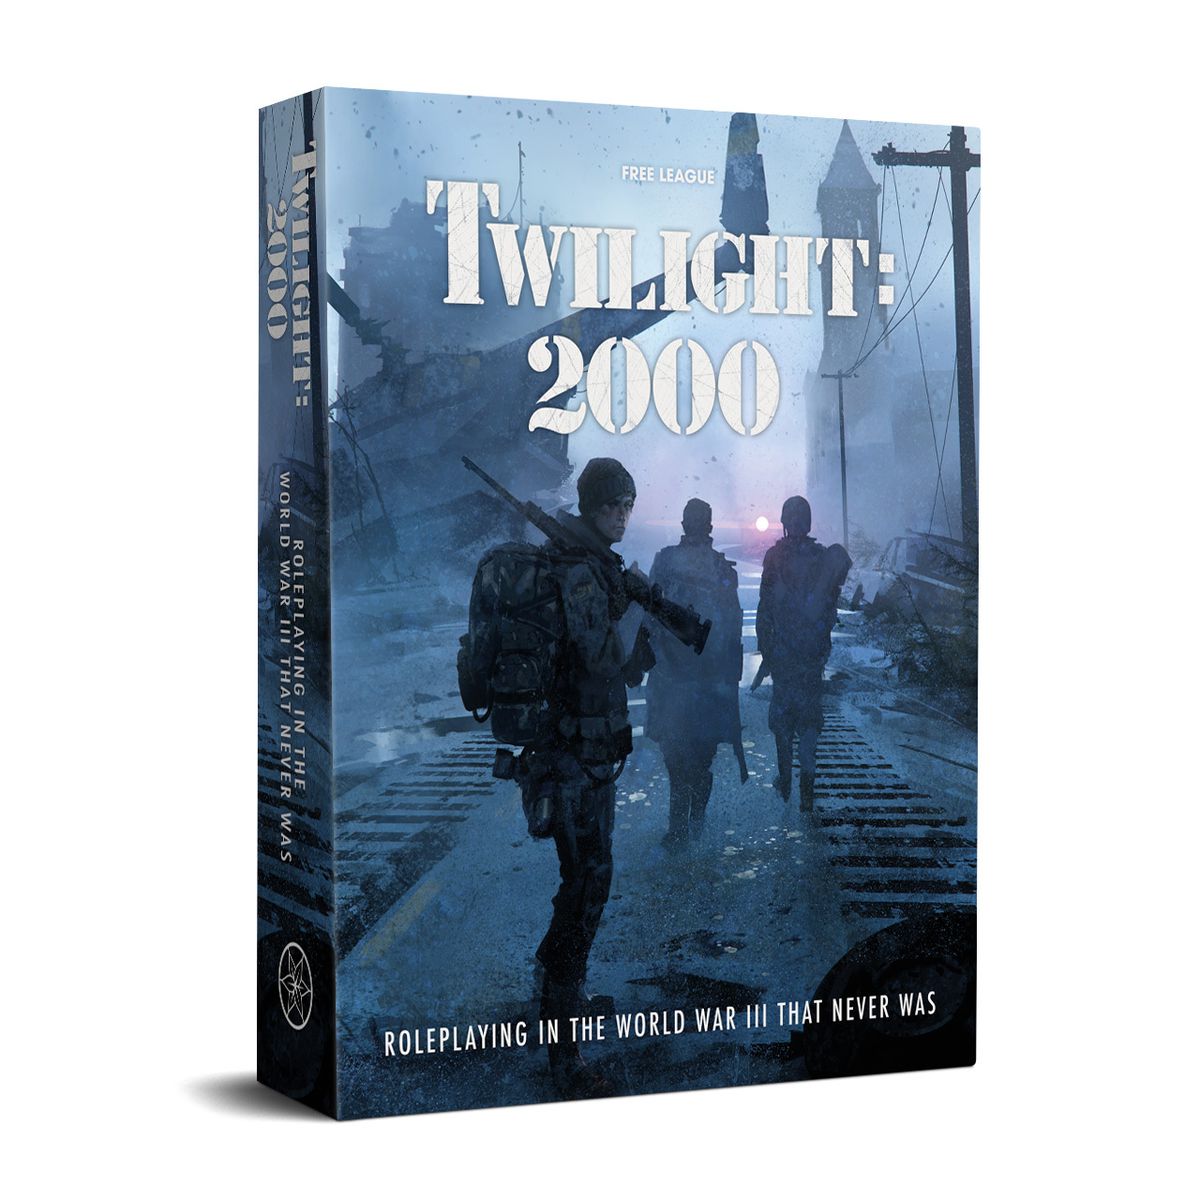 Cover art for Twilight: 2000 shows a small squad of three moving along a train line past a downed helicopter. The light is dim and blue, with a flare burning in the distance.